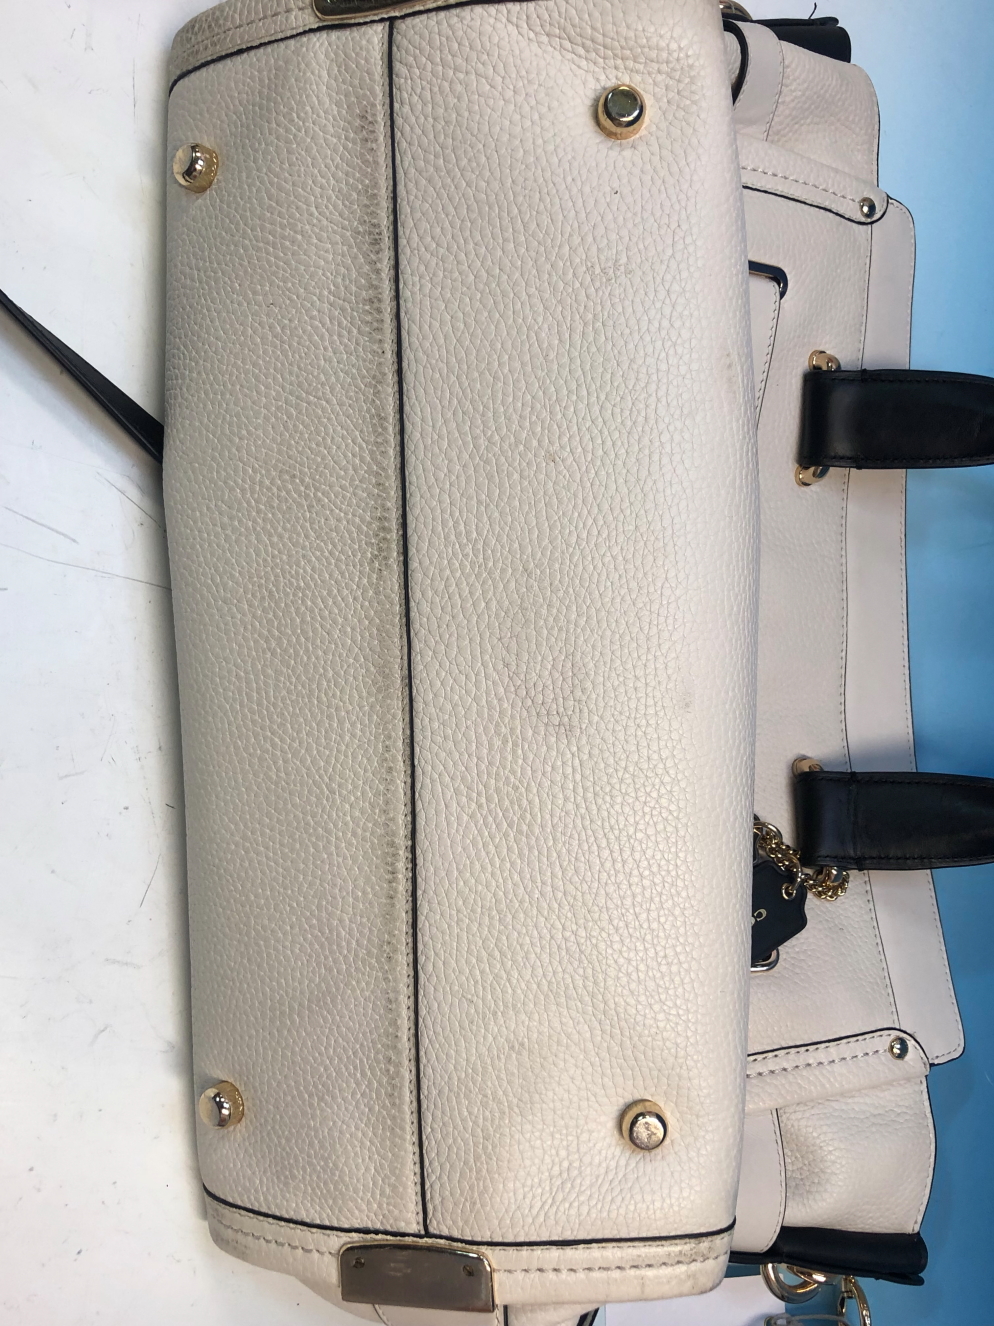 A COACH NEW YORK CREAM AND BLACK LARGE LEATHER HANDBAG WITH DUSTBAG. - Image 10 of 11